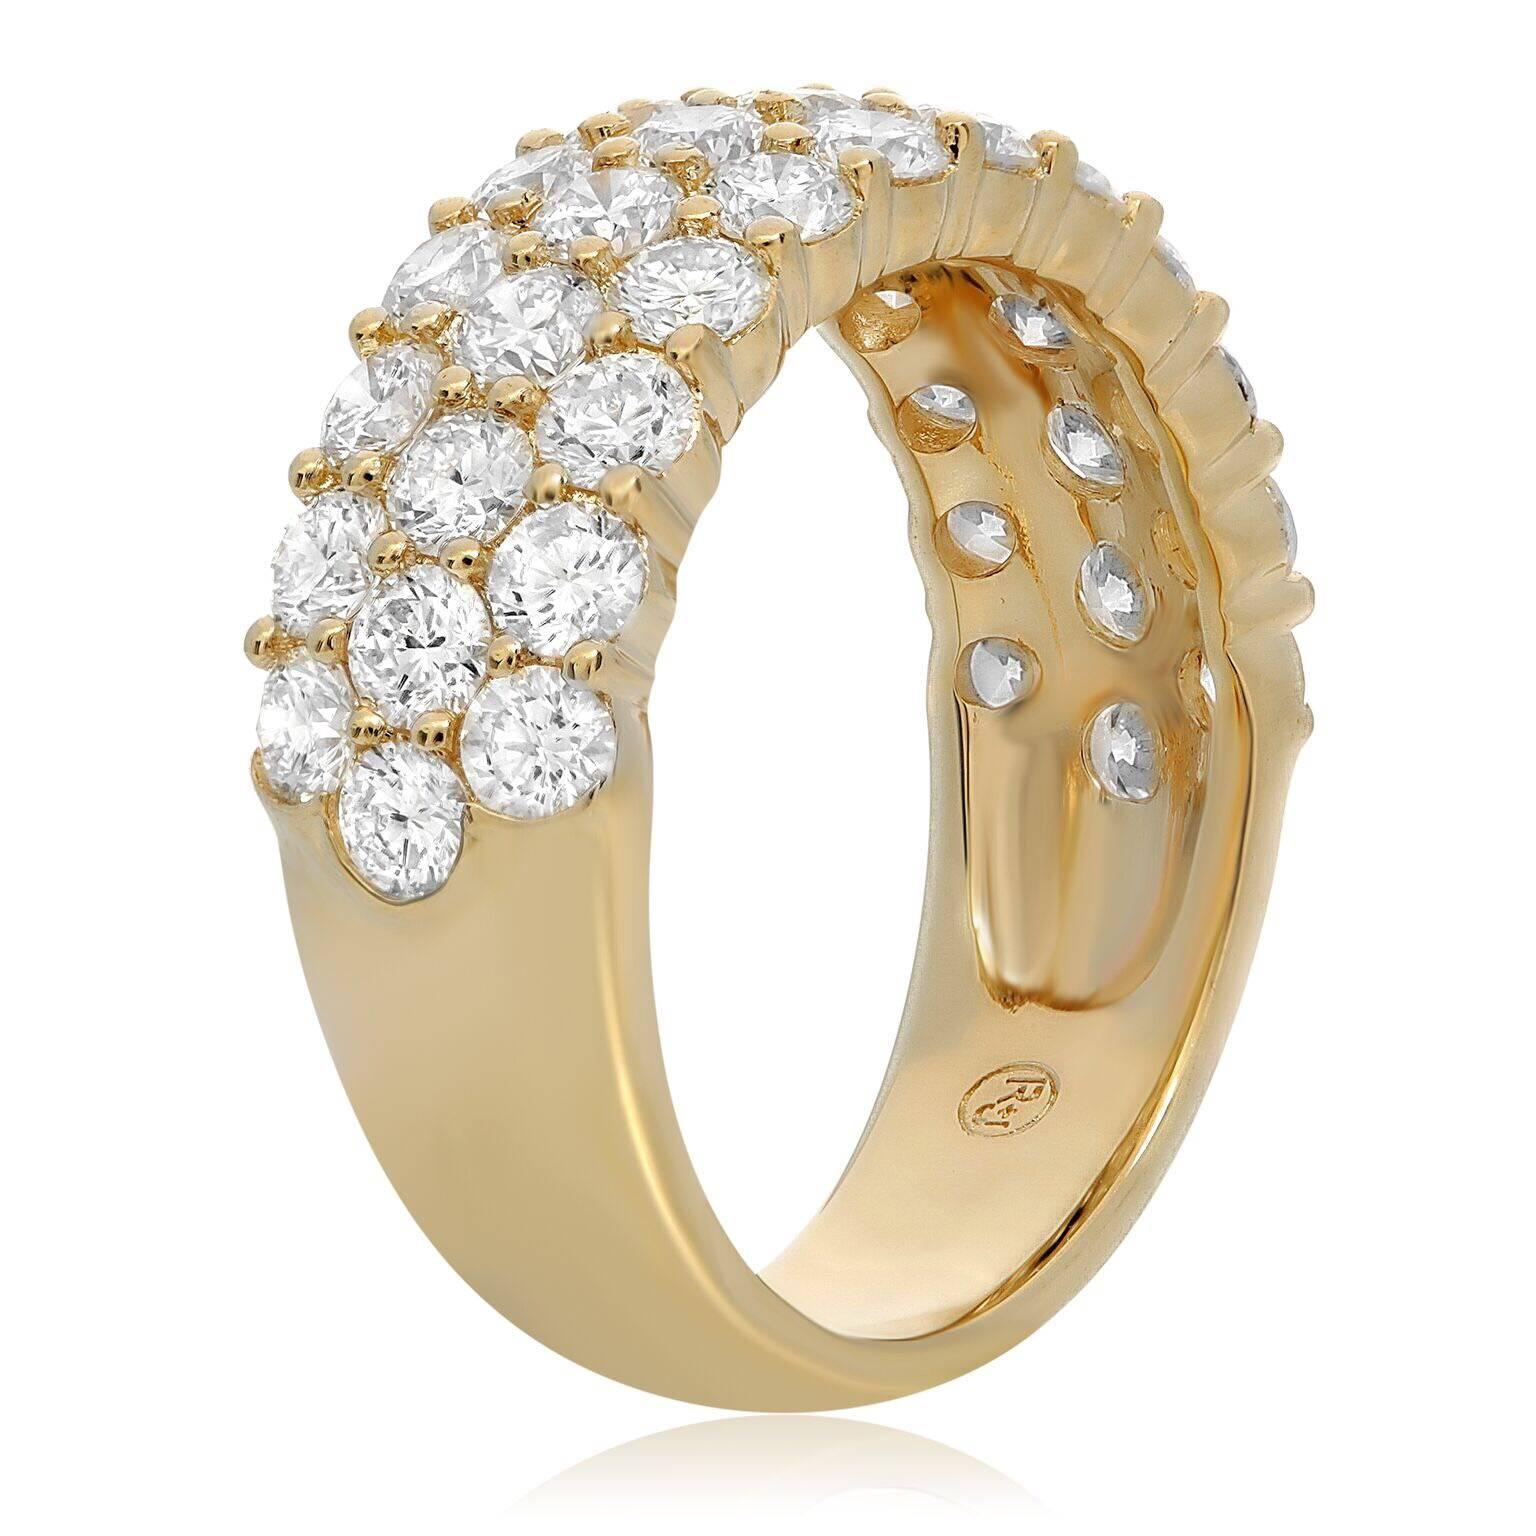 Three rows of pave diamonds set in an 18K yellow gold band. Three rows of round cut white diamonds that total 2.40 cts are featured along the front of the band. This band ring can be added to a bridal jewelry suite. Also makes a perfect gift.